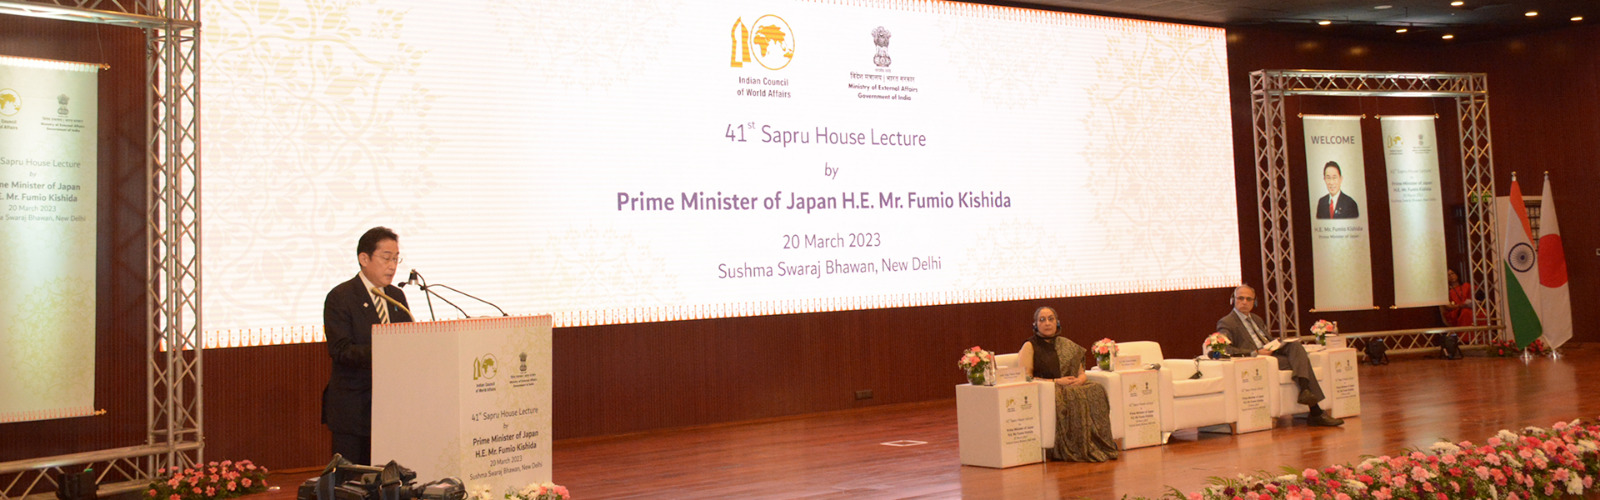 H.E. Mr. Fumio Kishida, Prime Minister of Japan delivering 41st Sapru House Lecture on “The Future of the Indo-Pacific – Japan’s New Plan for a “Free and Open Indo-Pacific” – “Together with India, as an Indispensable Partner”, 20 March 2023